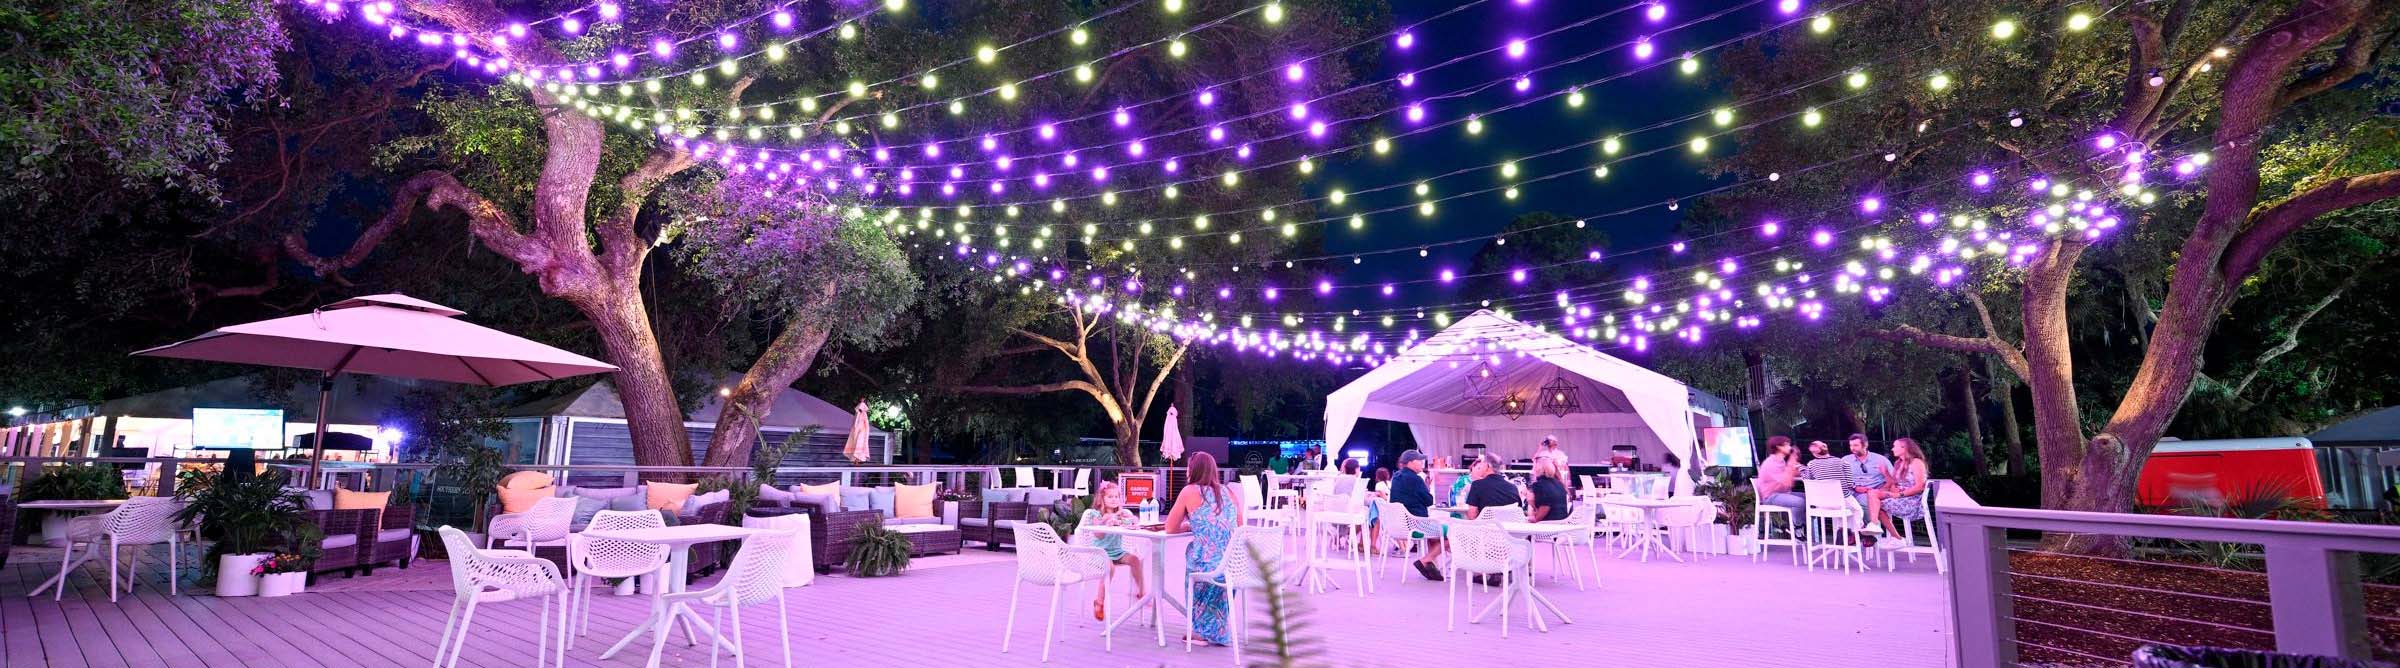 People mingle at tables and chairs beneath a colorful array of string lights during an evening outdoor event. 